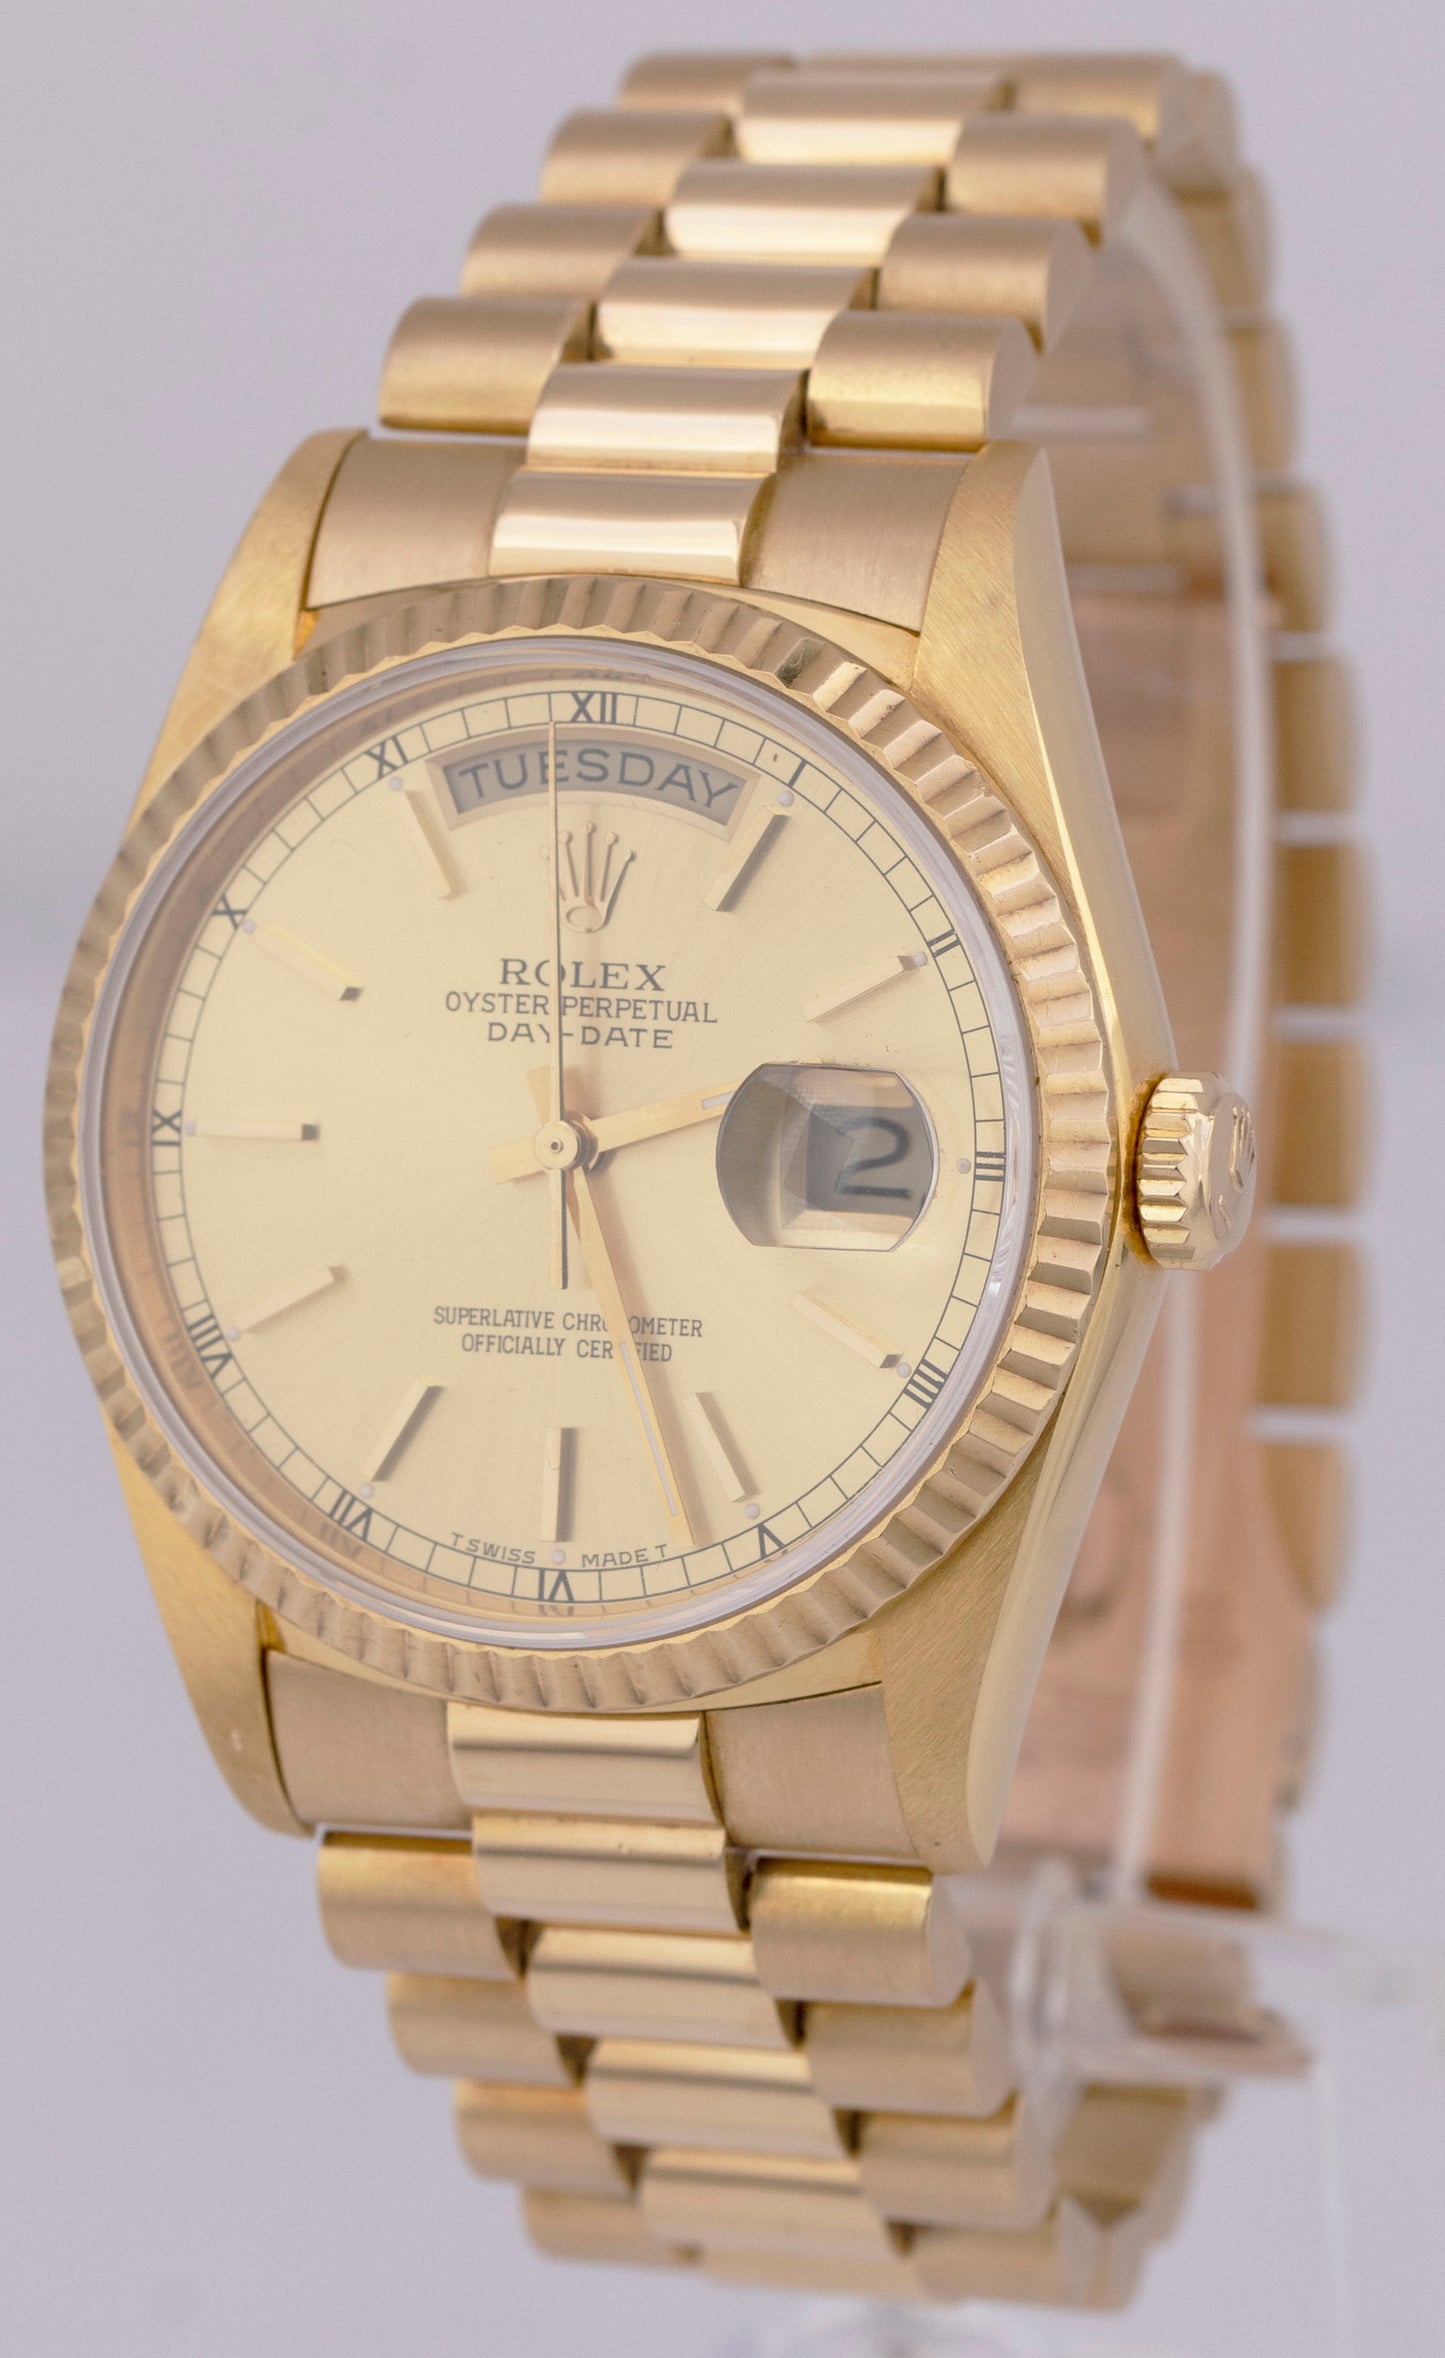 MINT Rolex Day-Date President PAPERS 36mm Double Quickset 18K Watch 18238 B+P